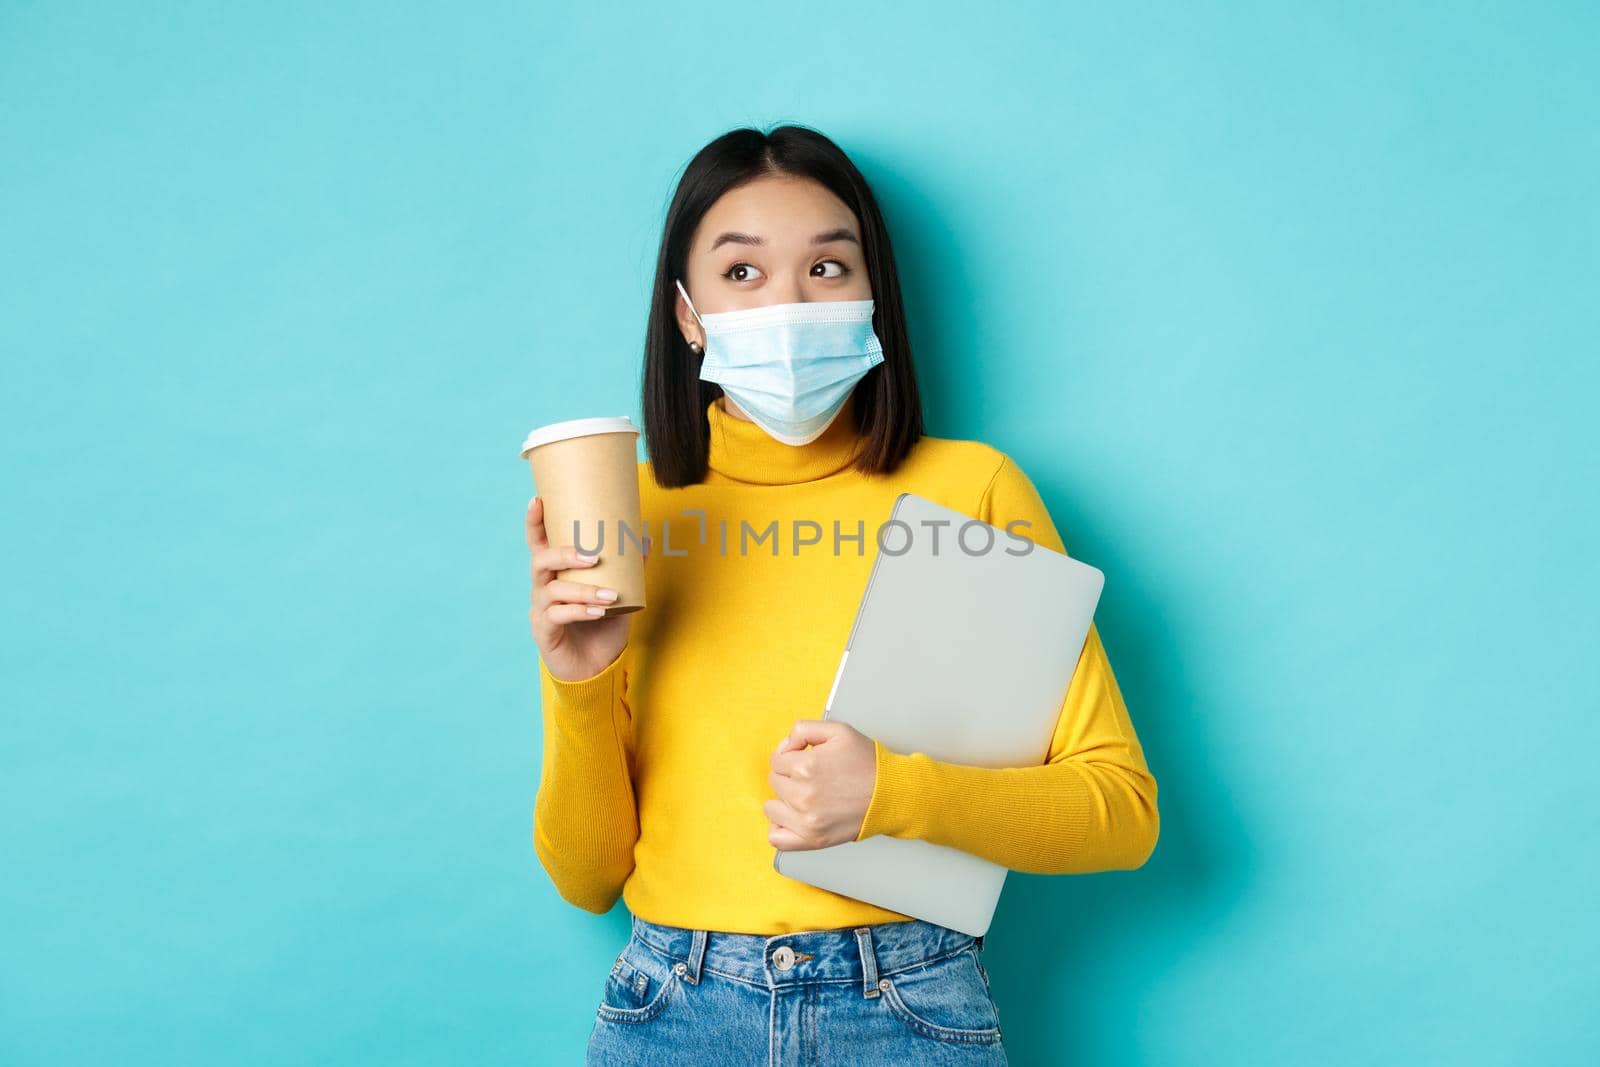 covid-19, health care and quarantine concept. Asian girl student in medical mask standing with laptop and coffee from cafe, standing over blue background.